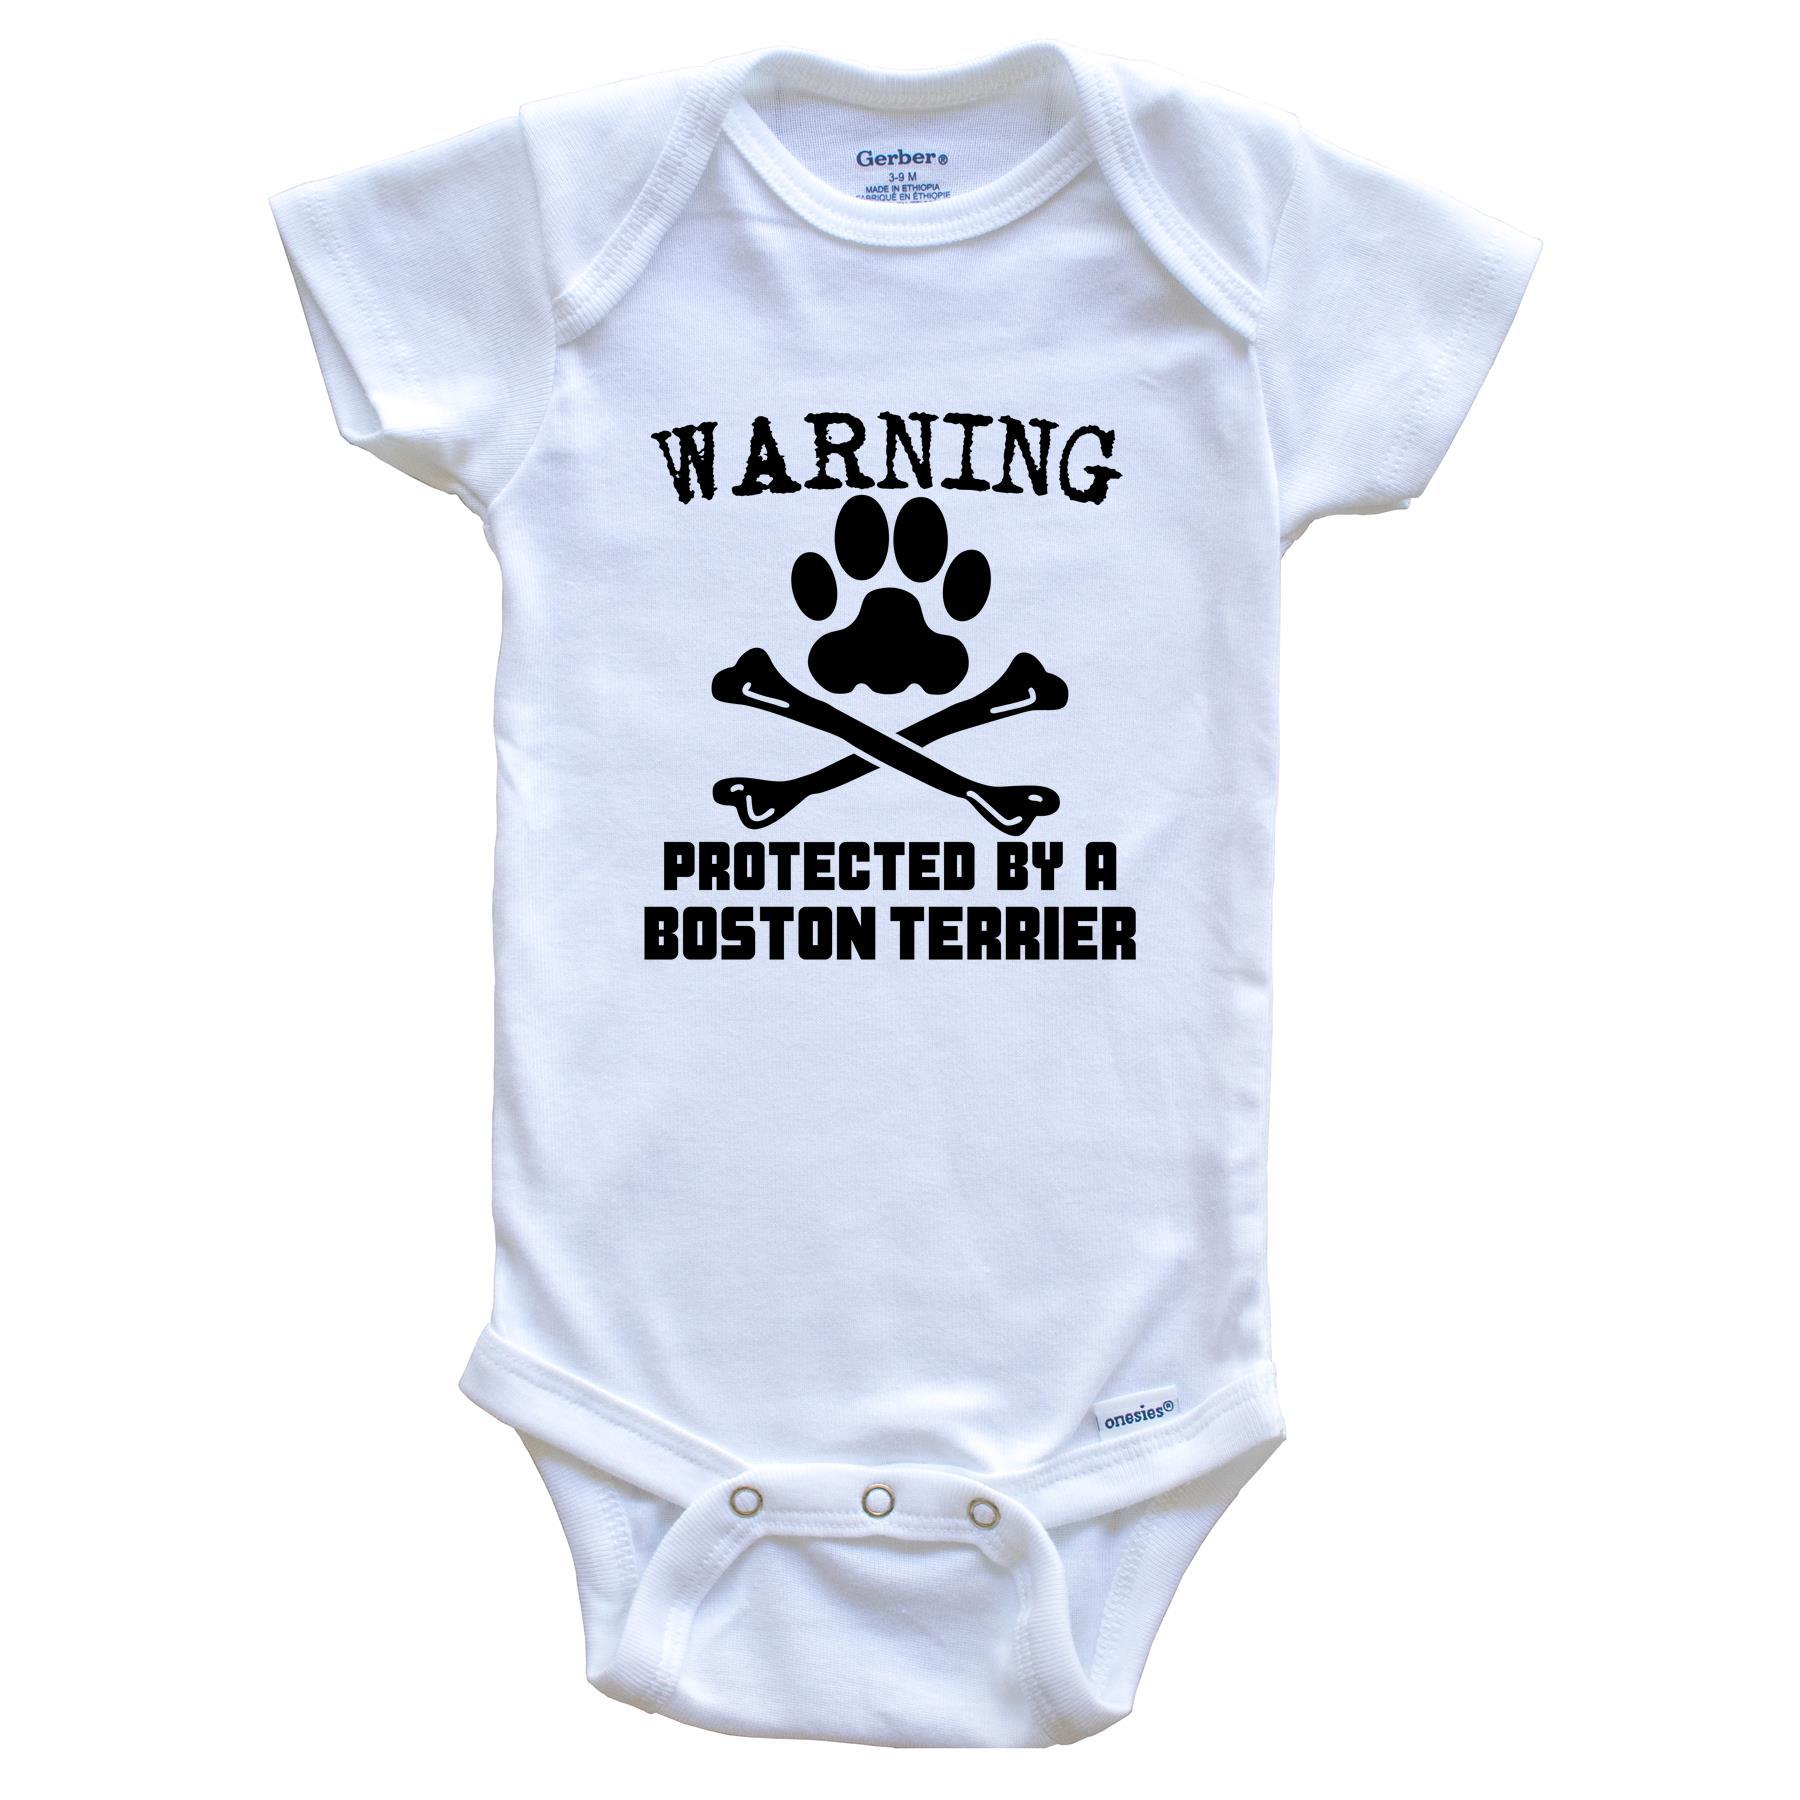 Warning Protected By A Boston Terrier Funny Baby Onesie